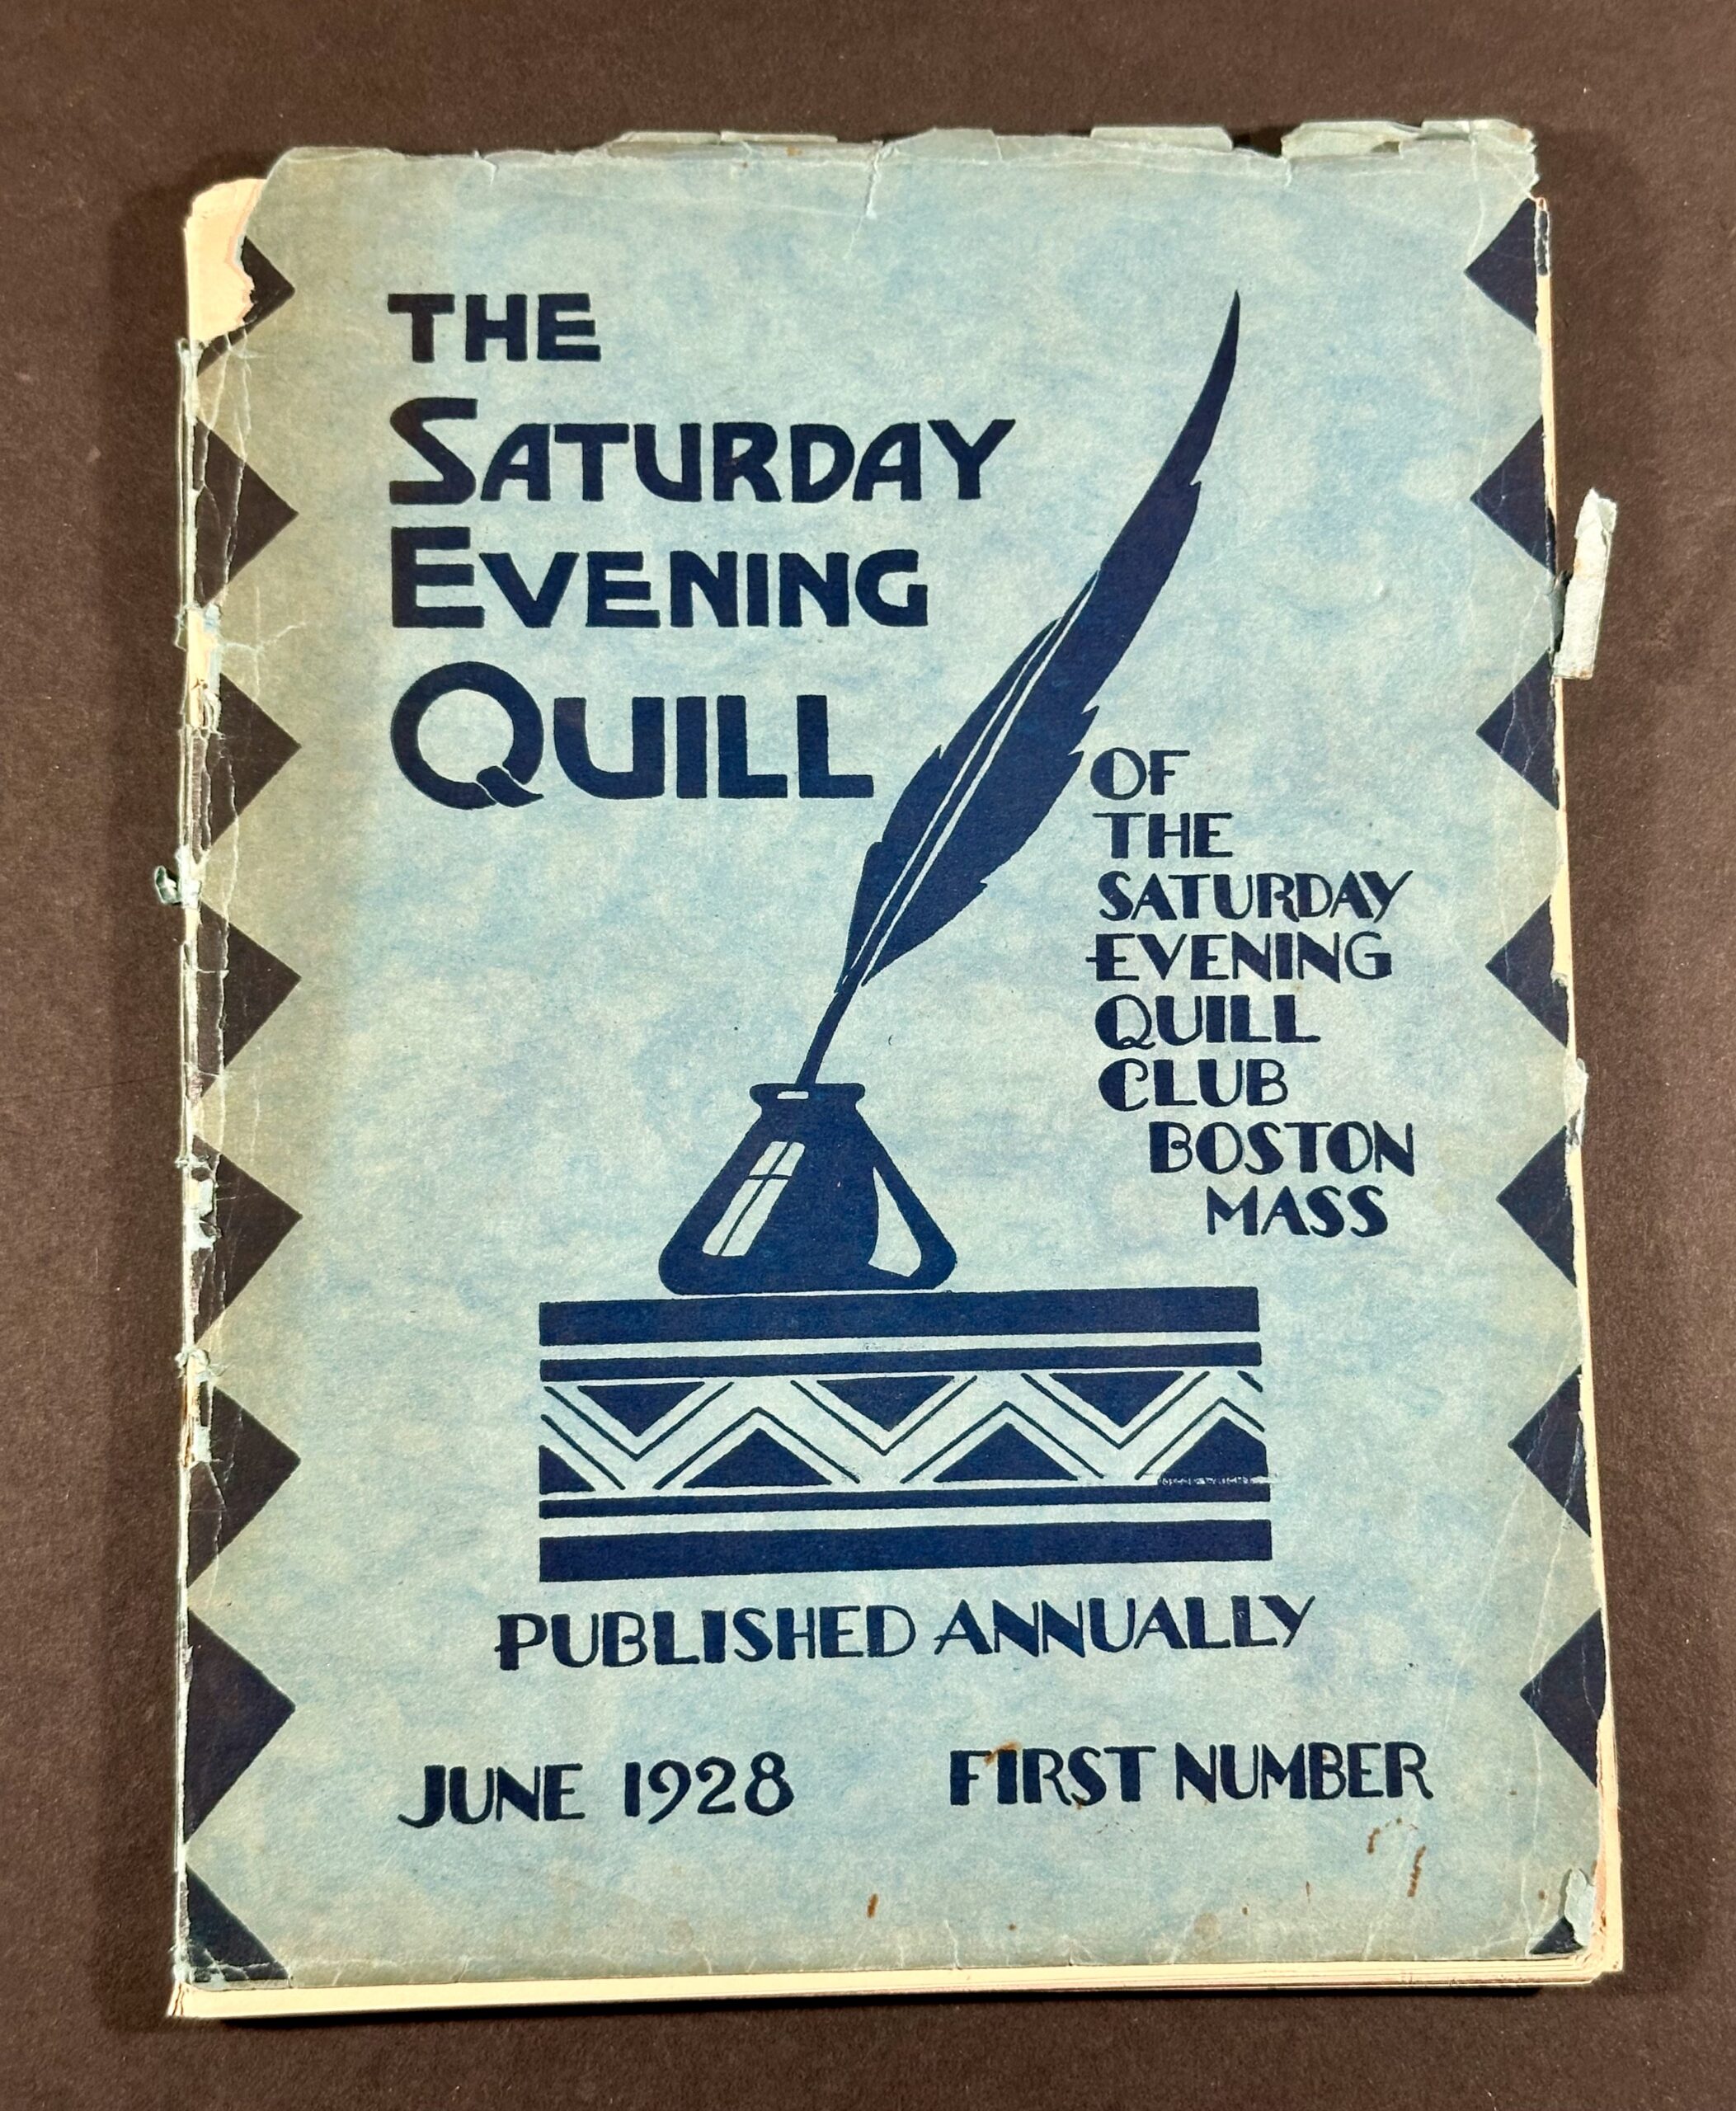 Gordon, Eugene. The Saturday Evening Quill, [June 1928], from the Alice Dunbar Nelson Collection